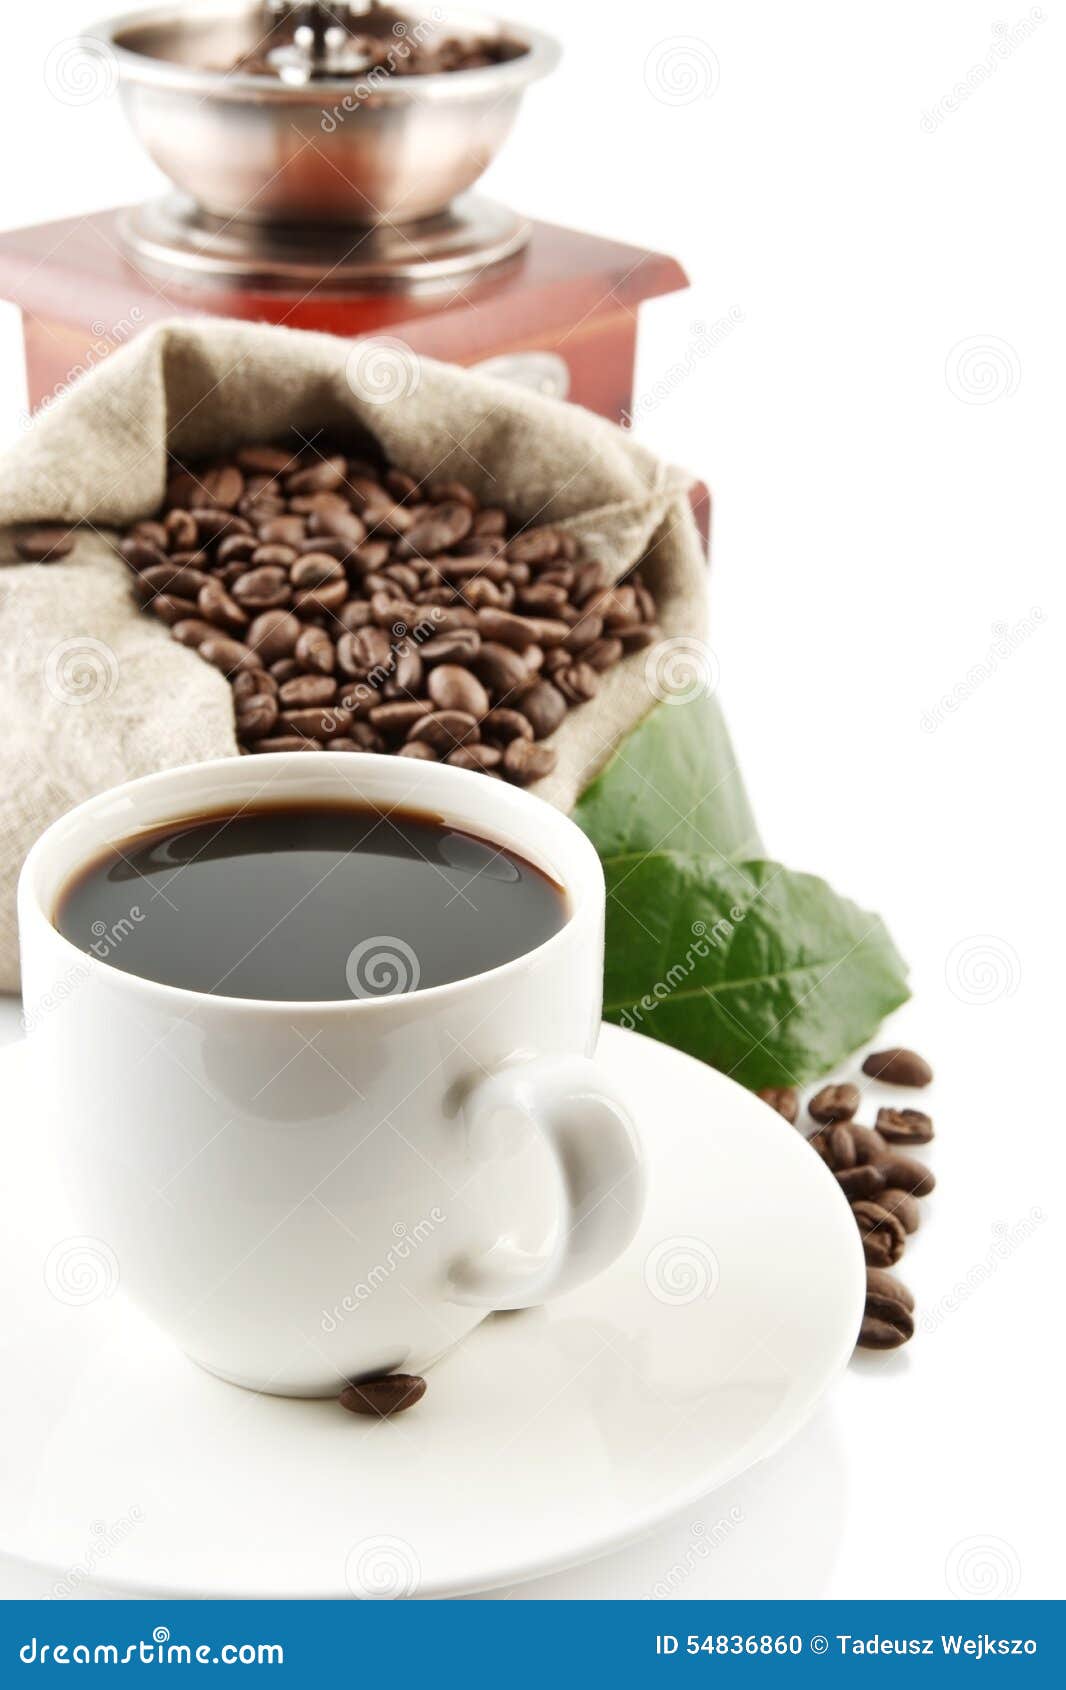 cup of coffee with mill,bag full of coffee beans on white